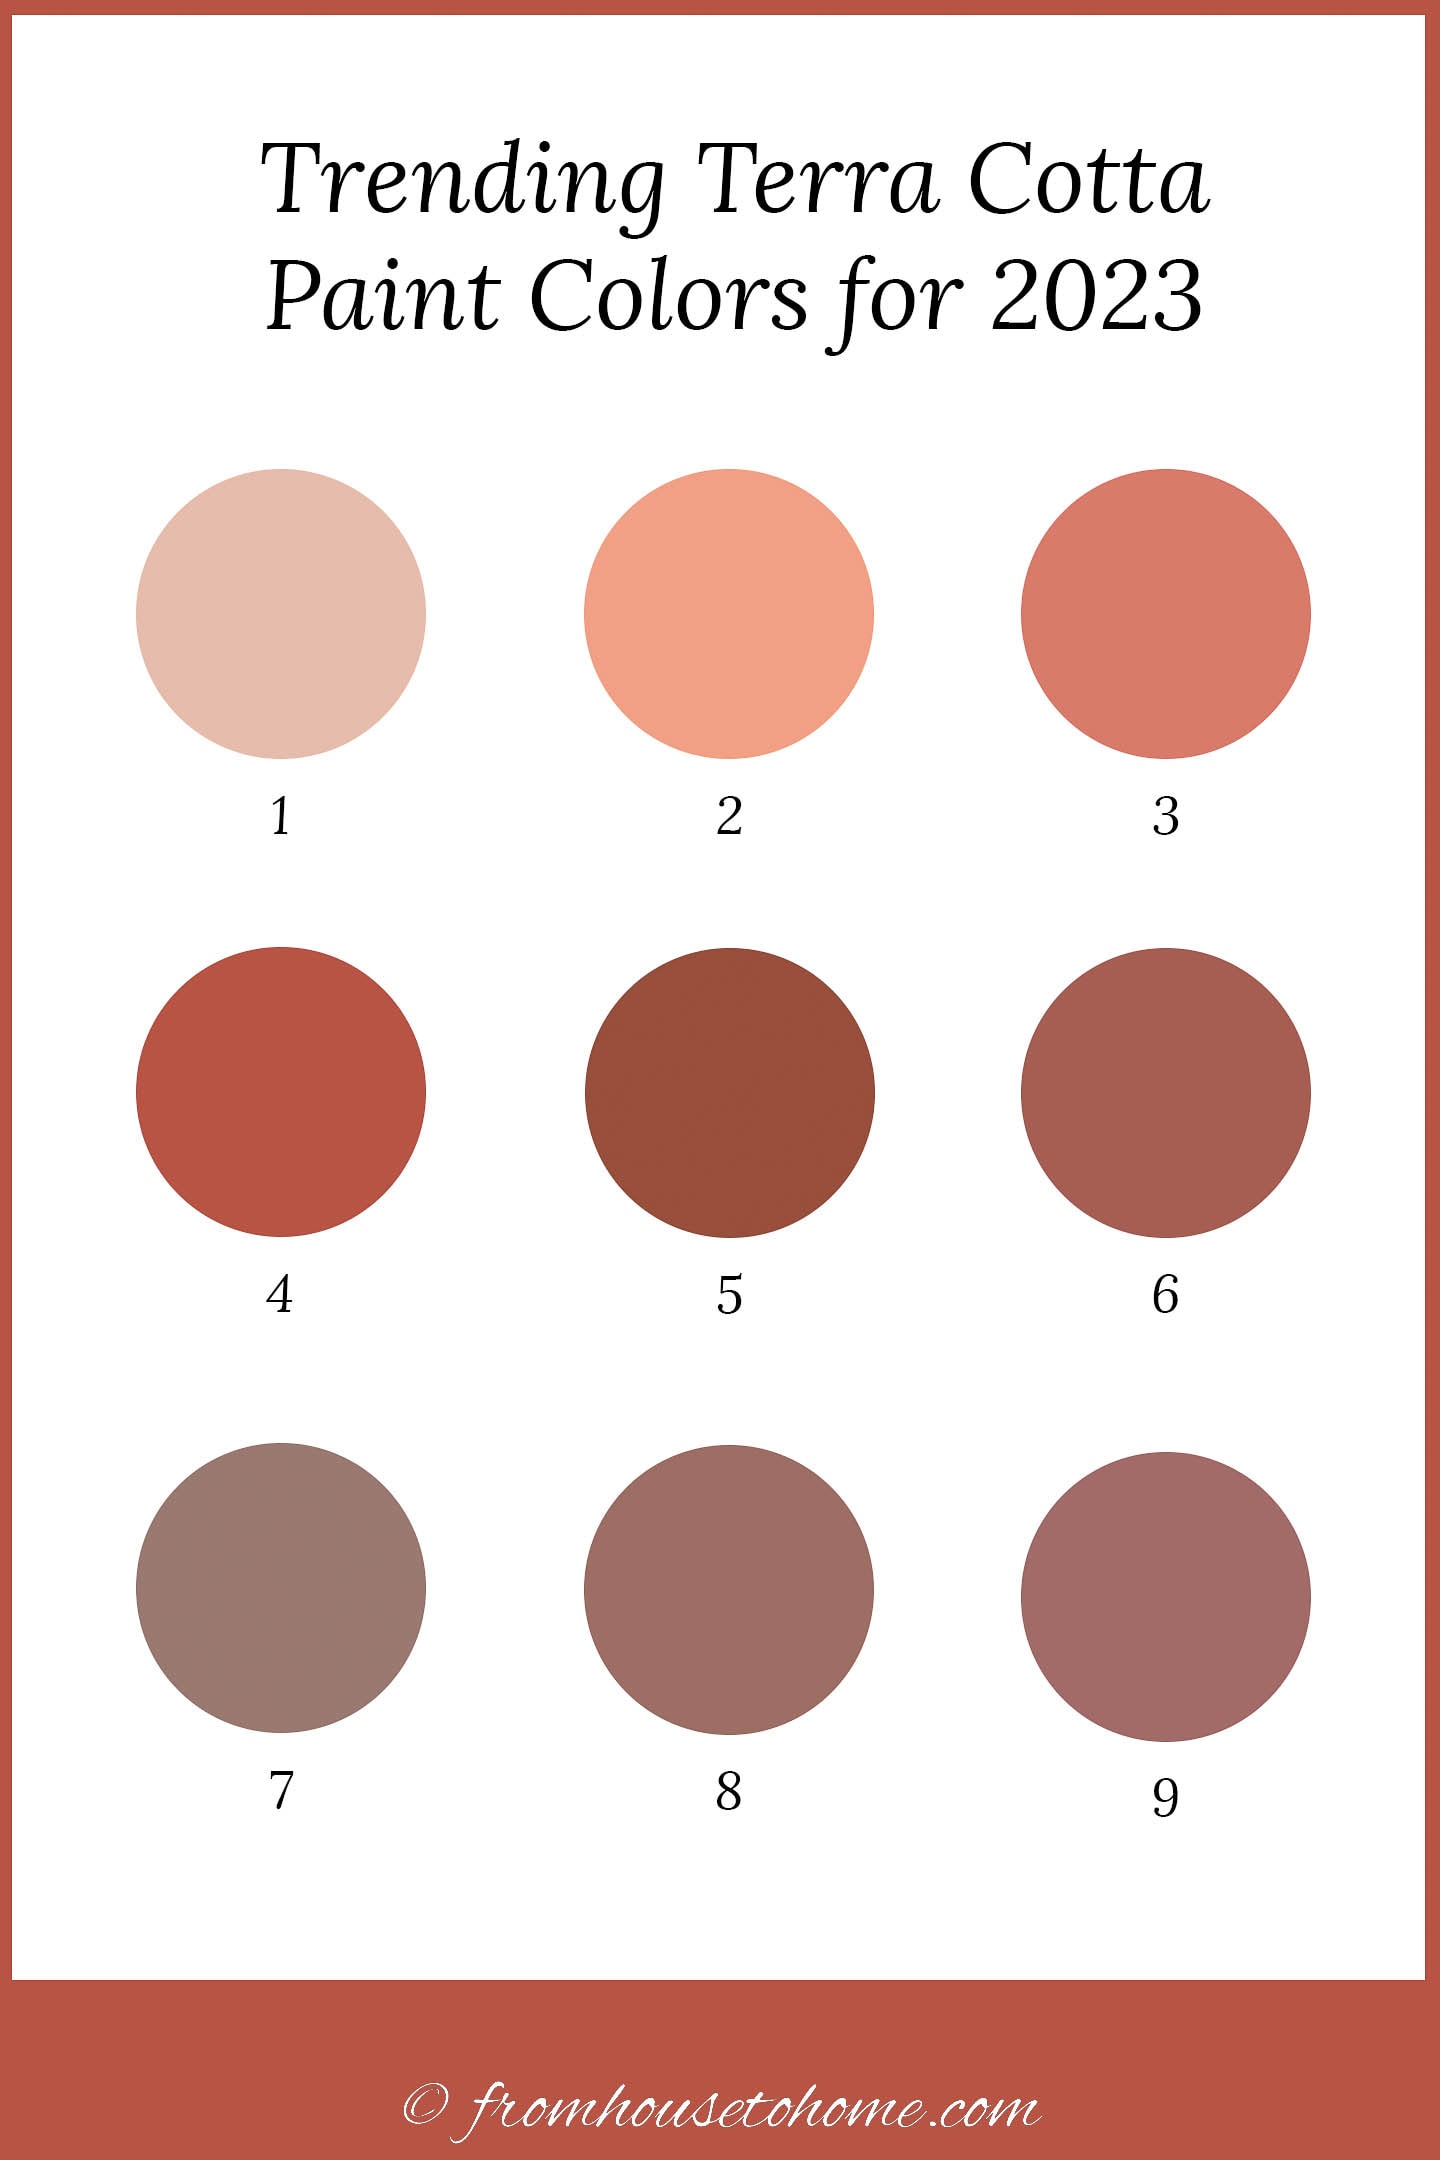 9 swatches of trending terra cotta paint colors for 2023